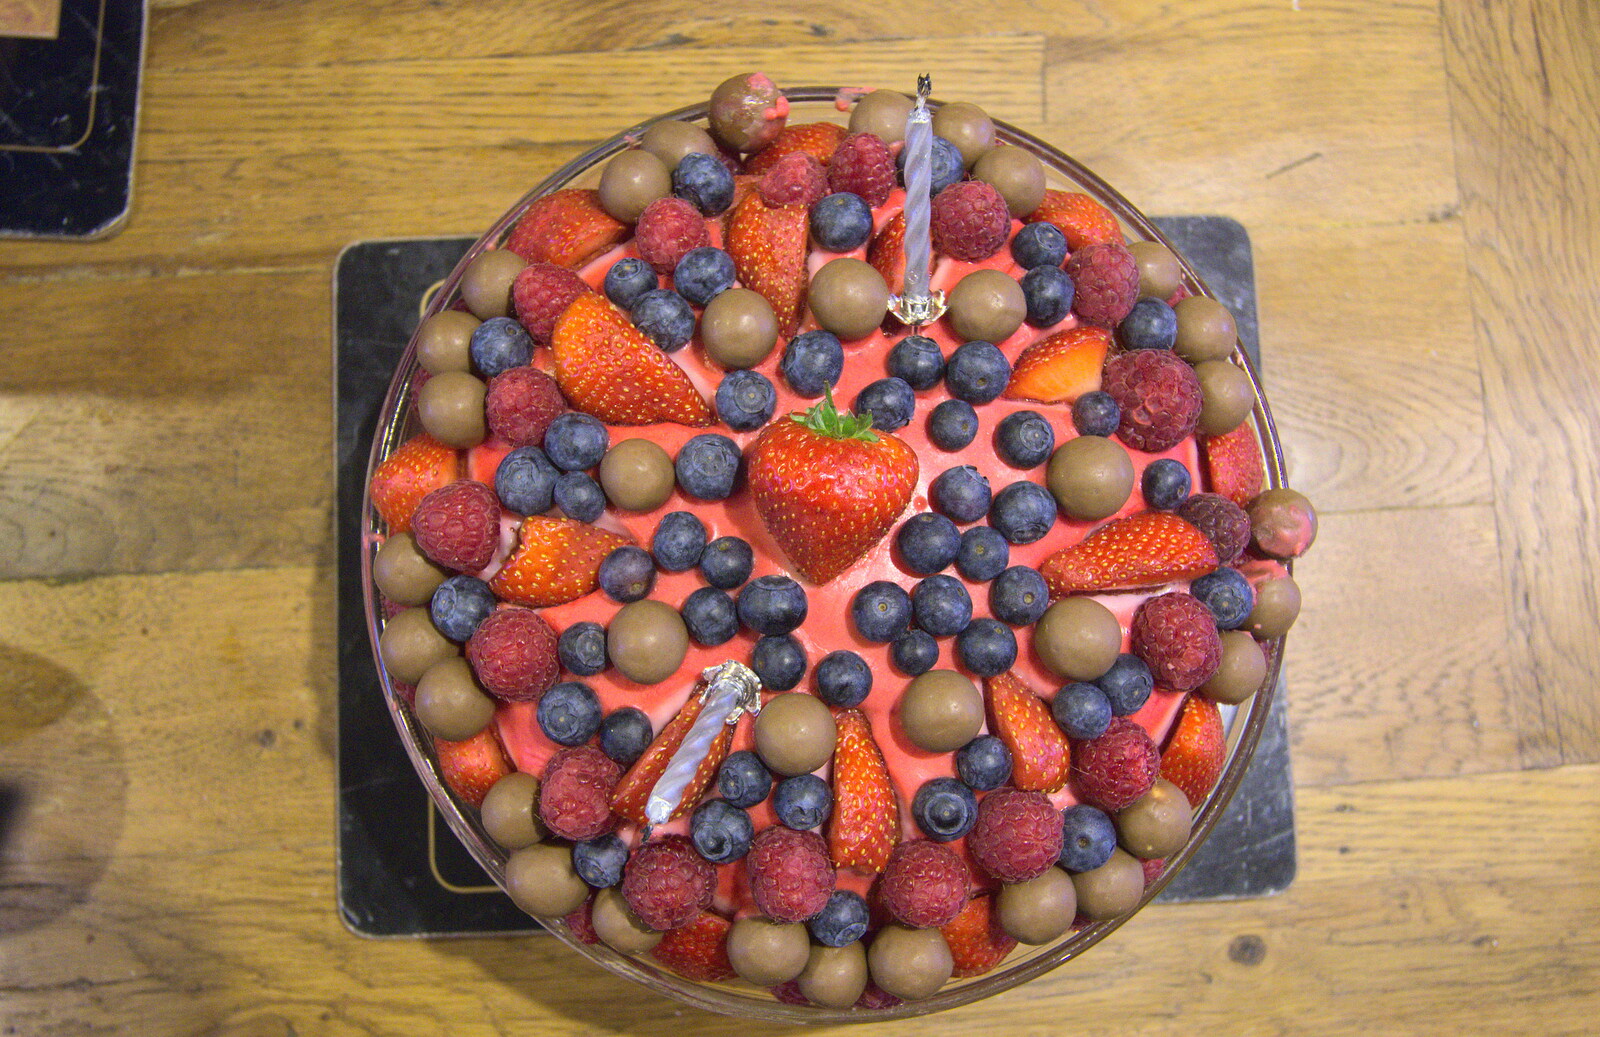 Isobel's fruit cake from On Being Two: Harry's Birthday, Brome, Suffolk - 28th March 2014